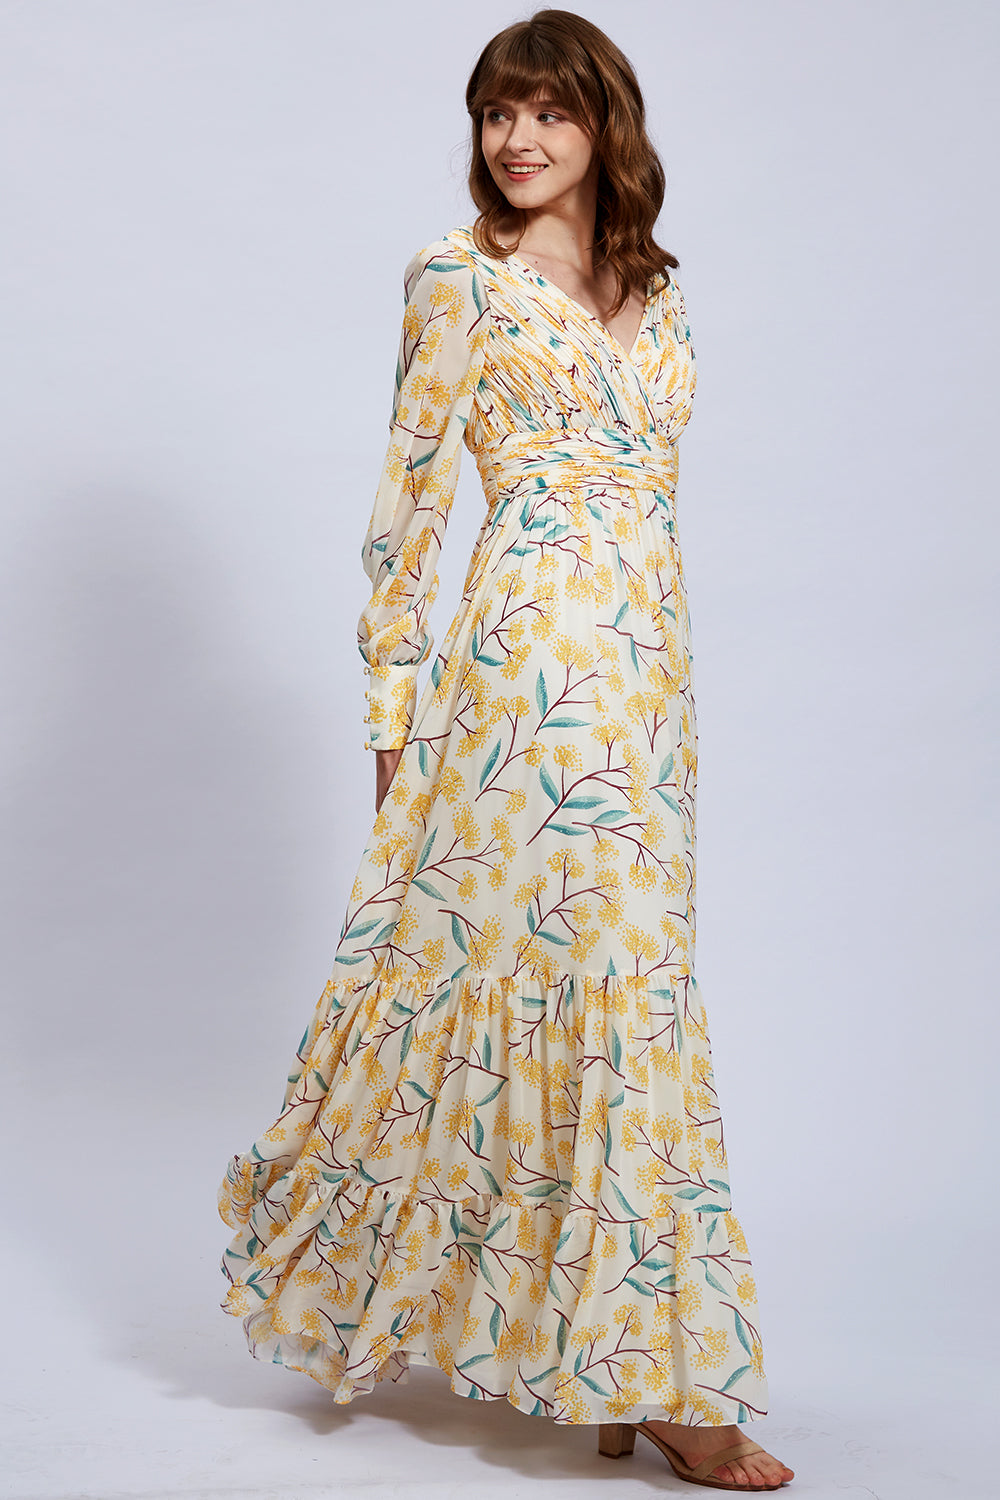 Puff Long Sleeves V Neck Floral Chiffon Yellow Evening Gown